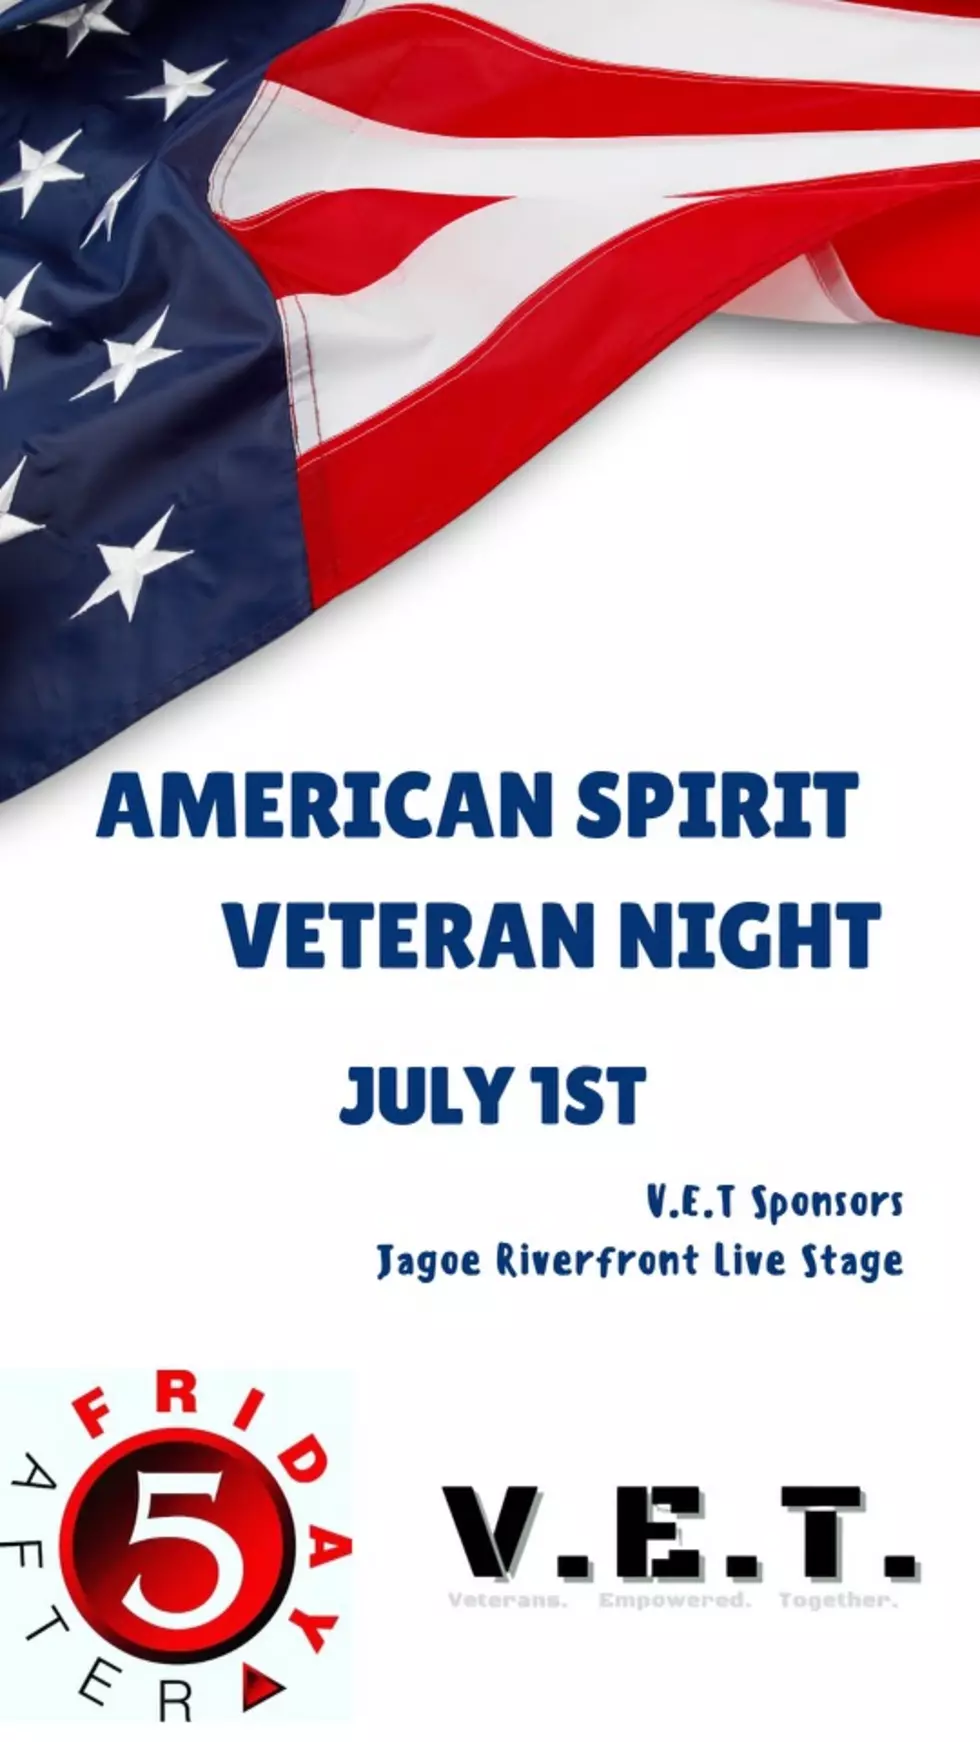 Friday After 5 Kicks Off 4th of July Weekend in Owensboro with a Patriotic Veteran Salute